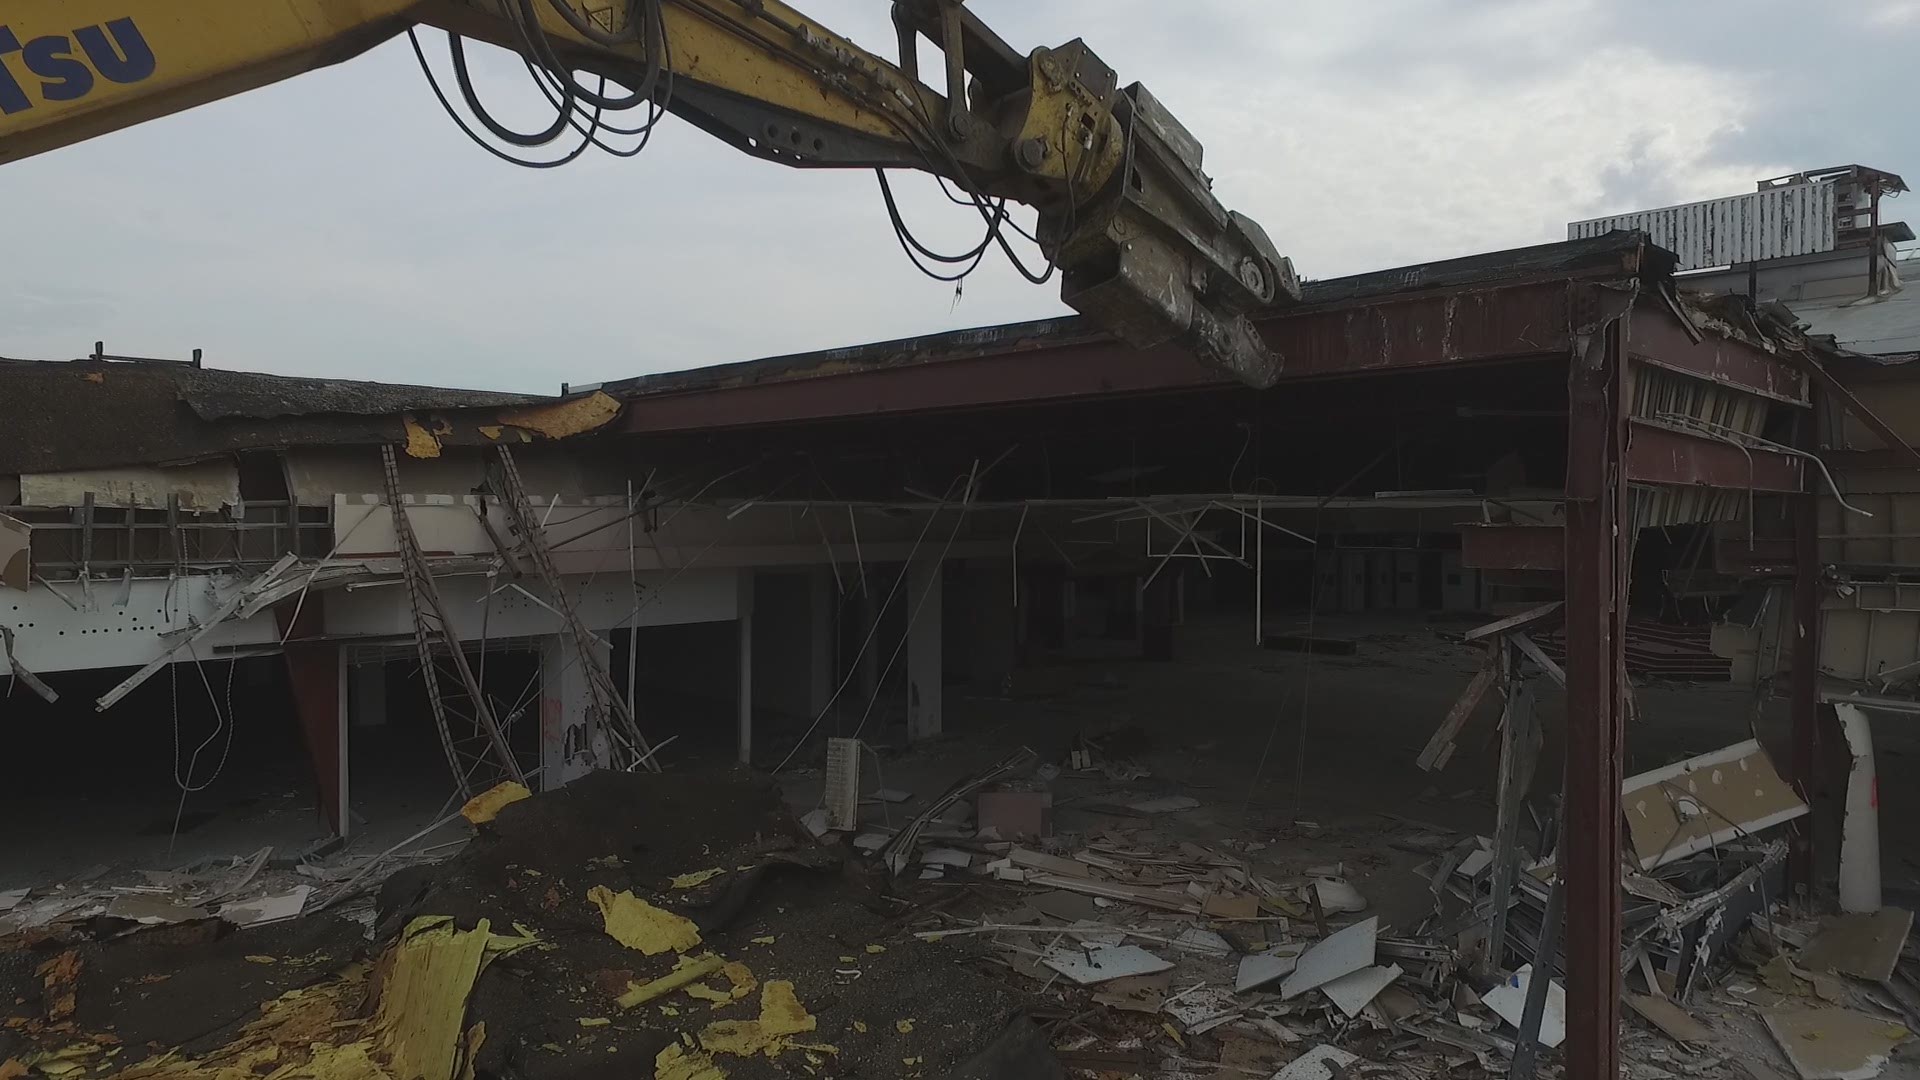 November 2016: Watch drone footage as it flies through the abandoned Rolling Acres Mall in Akron. Demolition has started on the former popular shopping haven.